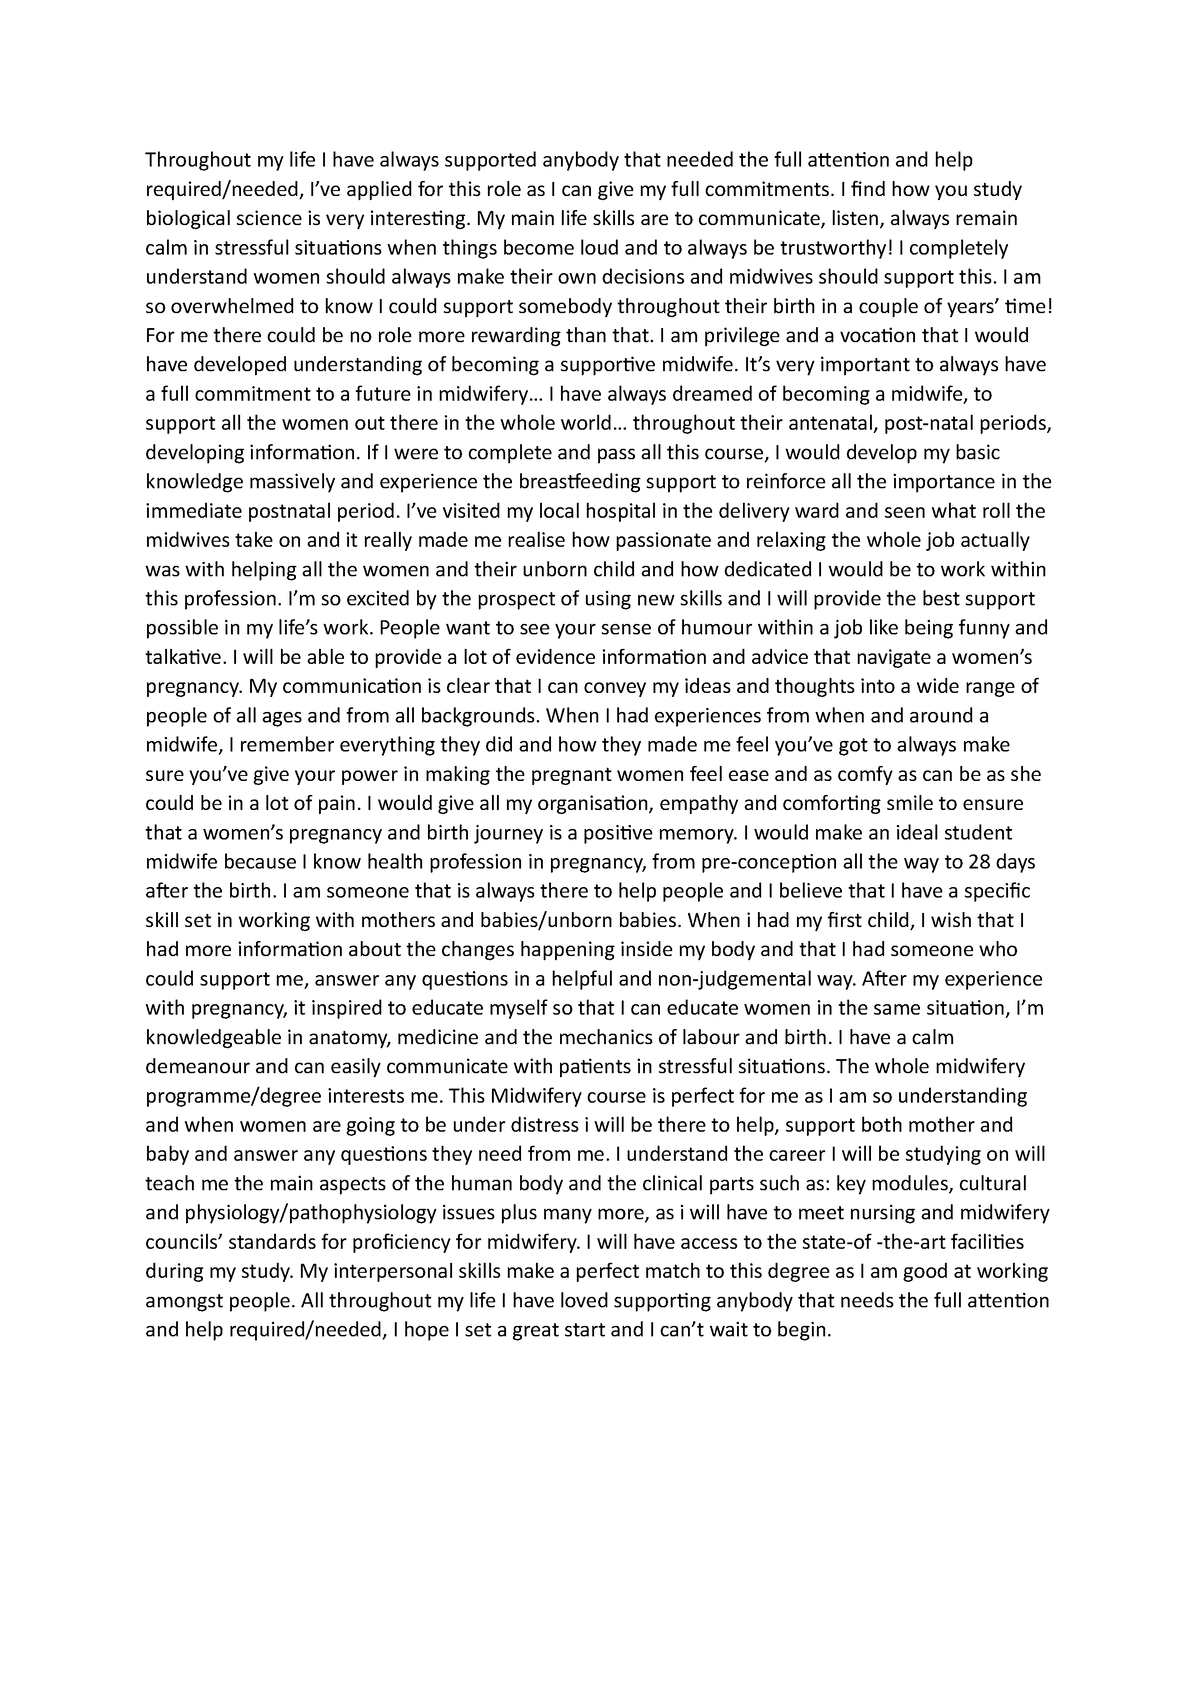 sample personal statement for university midwifery